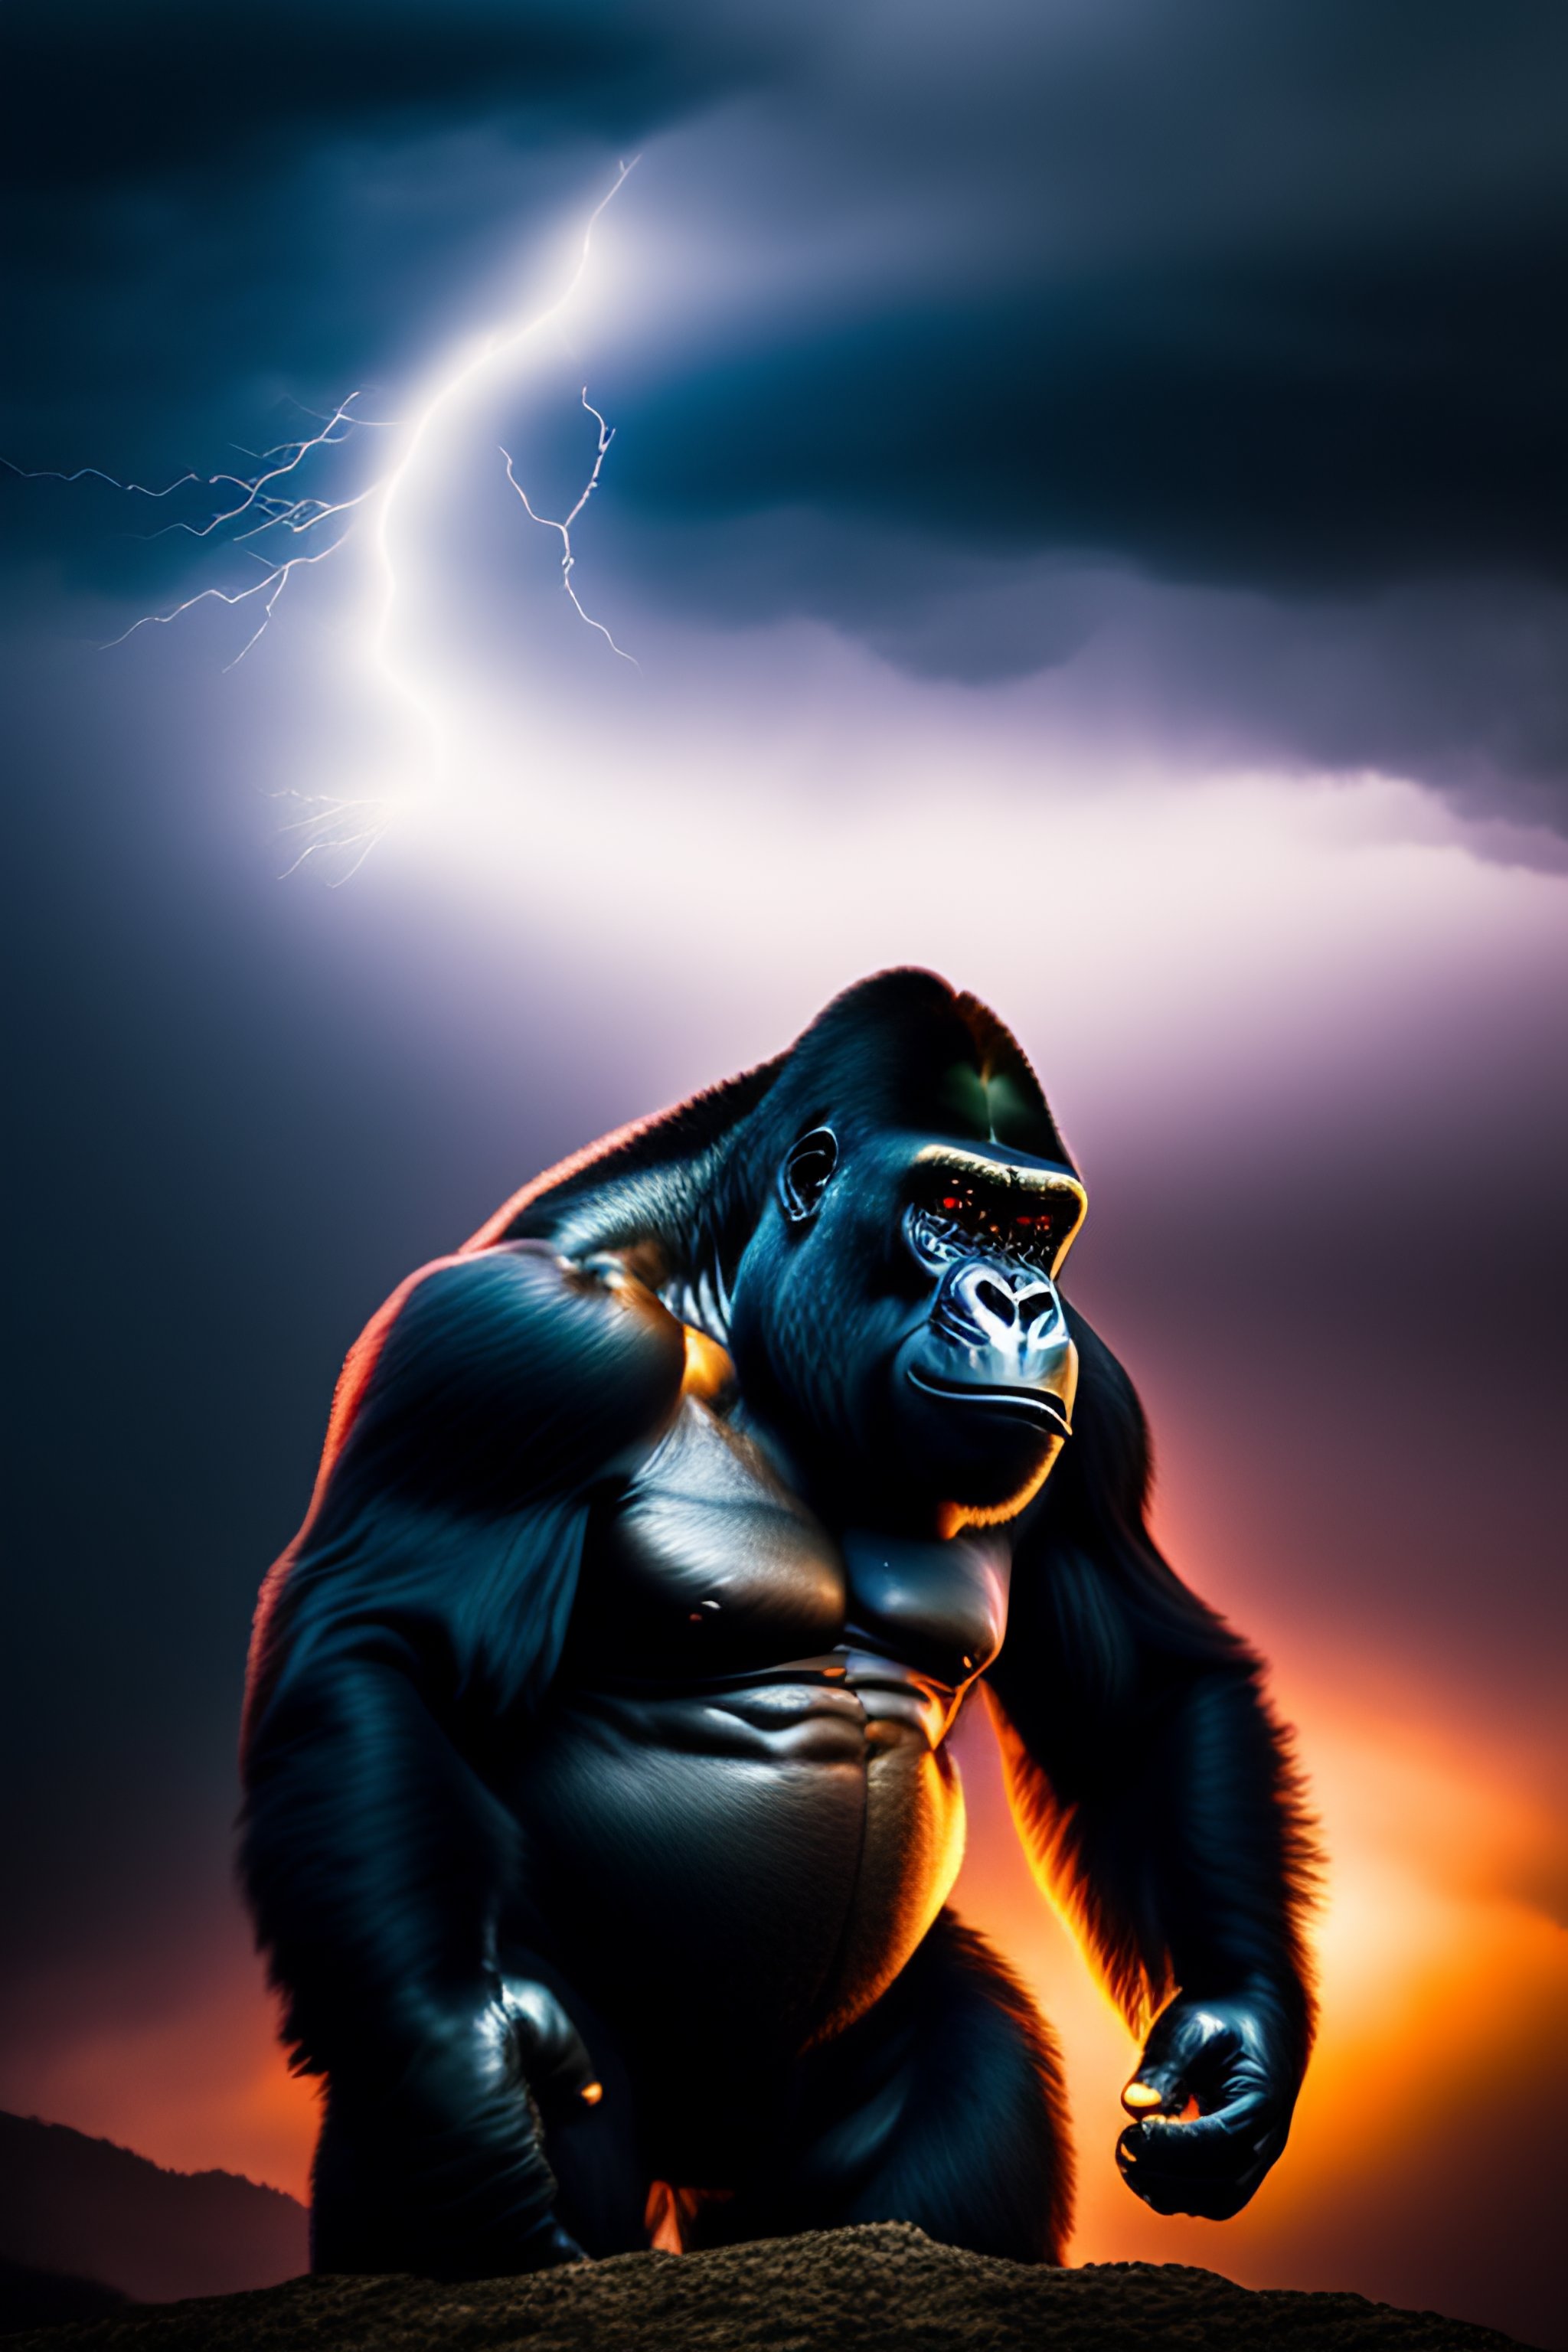 Lexica - A gorilla shooting lightning from it's hands